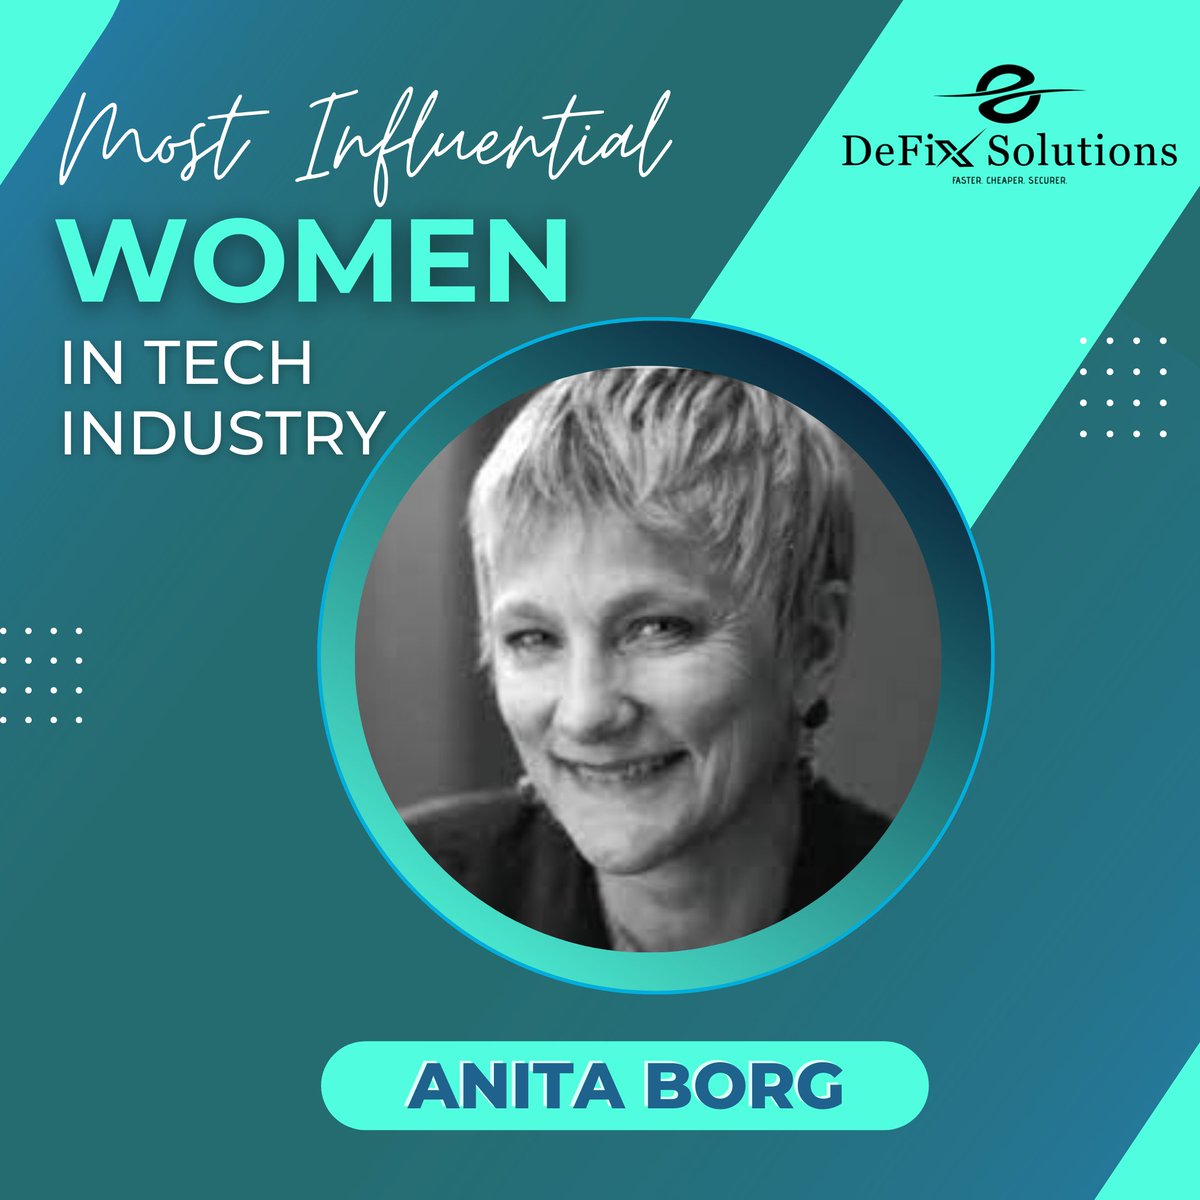 Borg's pioneering work as a computer scientist and advocate for women in technology serves as an inspiration for today's women seeking to break down barriers in technology.

#DeFiXSolutions #DeFiX #WomenInTech #TechIndustry #AnitaBorg